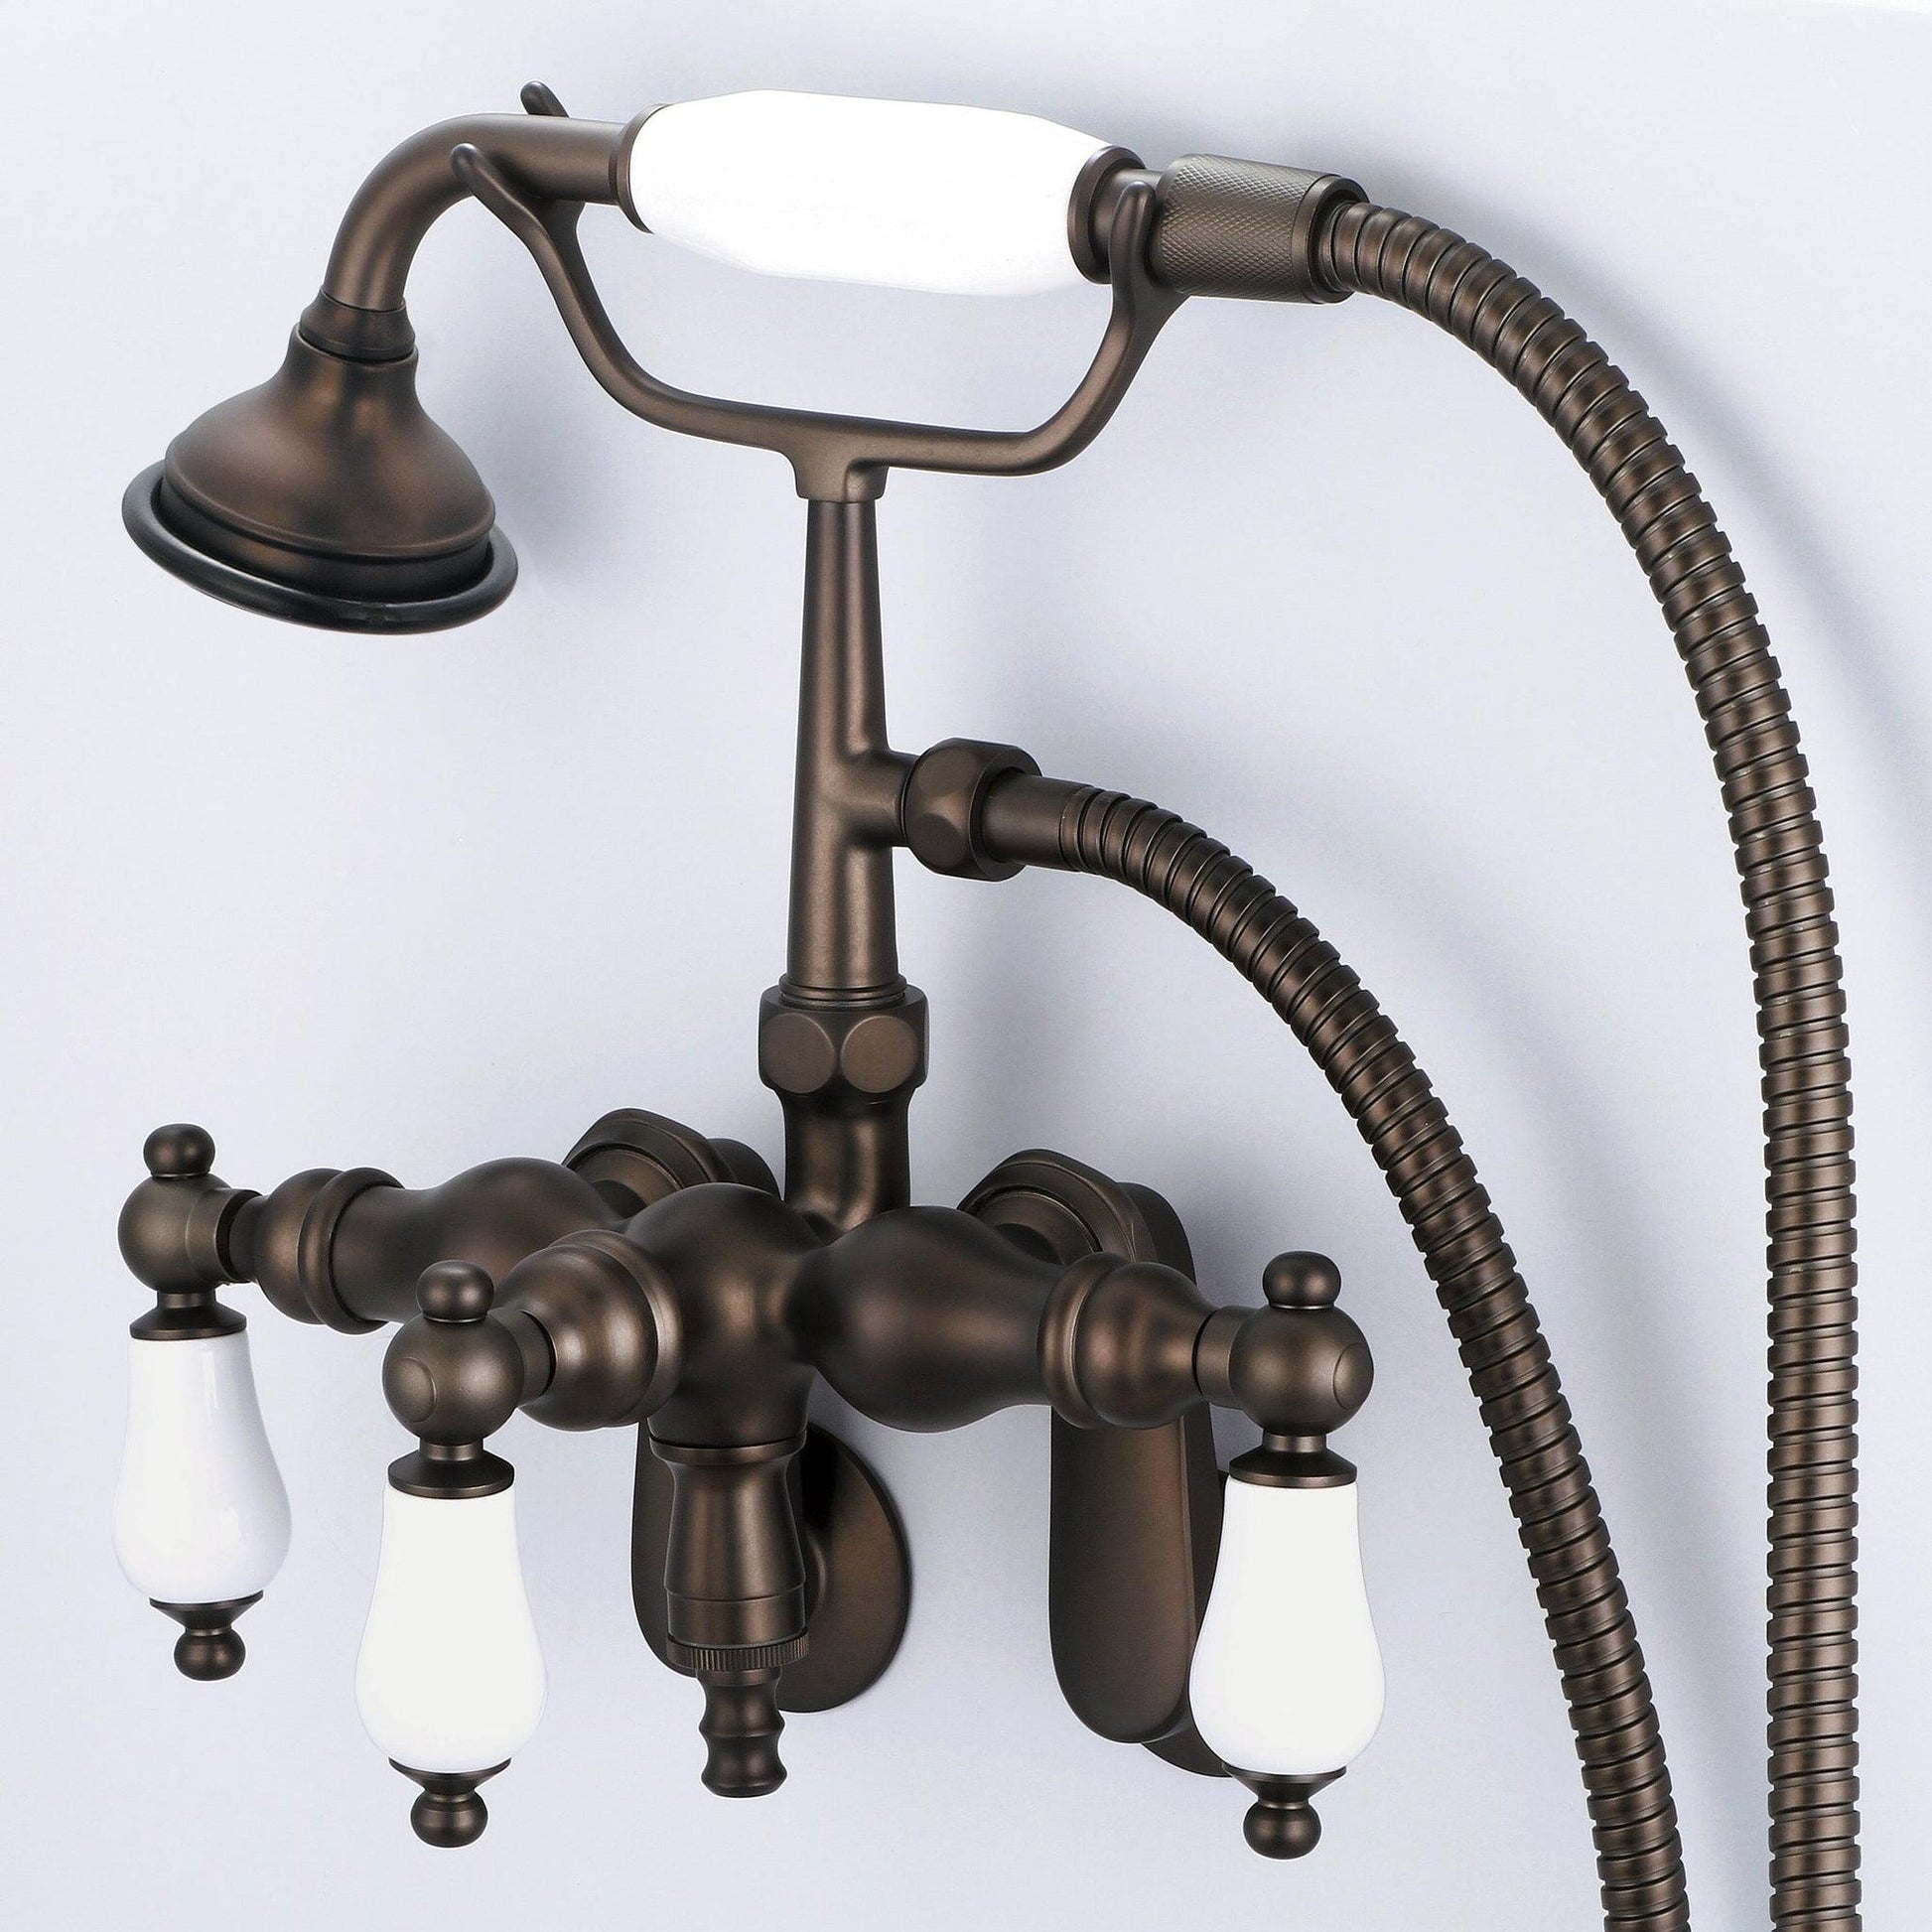 Water Creation Vintage Classic Center Wall Mount Tub F6-0018 9.25" Brown Solid Brass Faucet With Down Spout, Swivel Wall Connector And Handheld Shower And Porcelain Lever Handles Without Labels